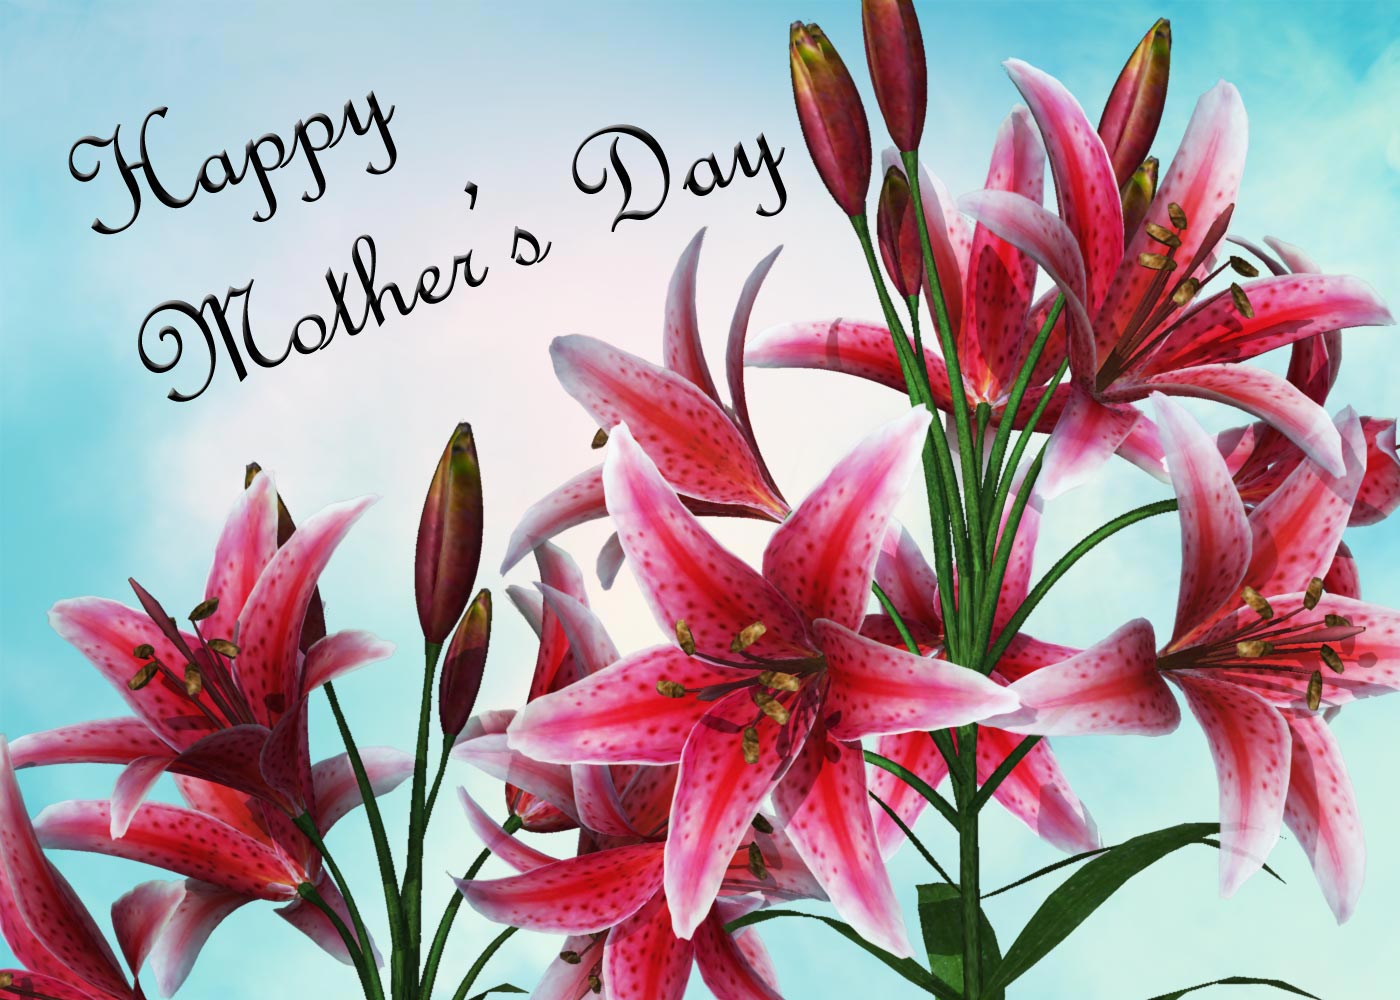 Common Mother's Day gifts include: cards, flowers, meals in restaurants, jewelry, gift cards, clothing, trips to a spa, books, CDs, housewares and even gardening tools. But remember- love is the most important of gifts.